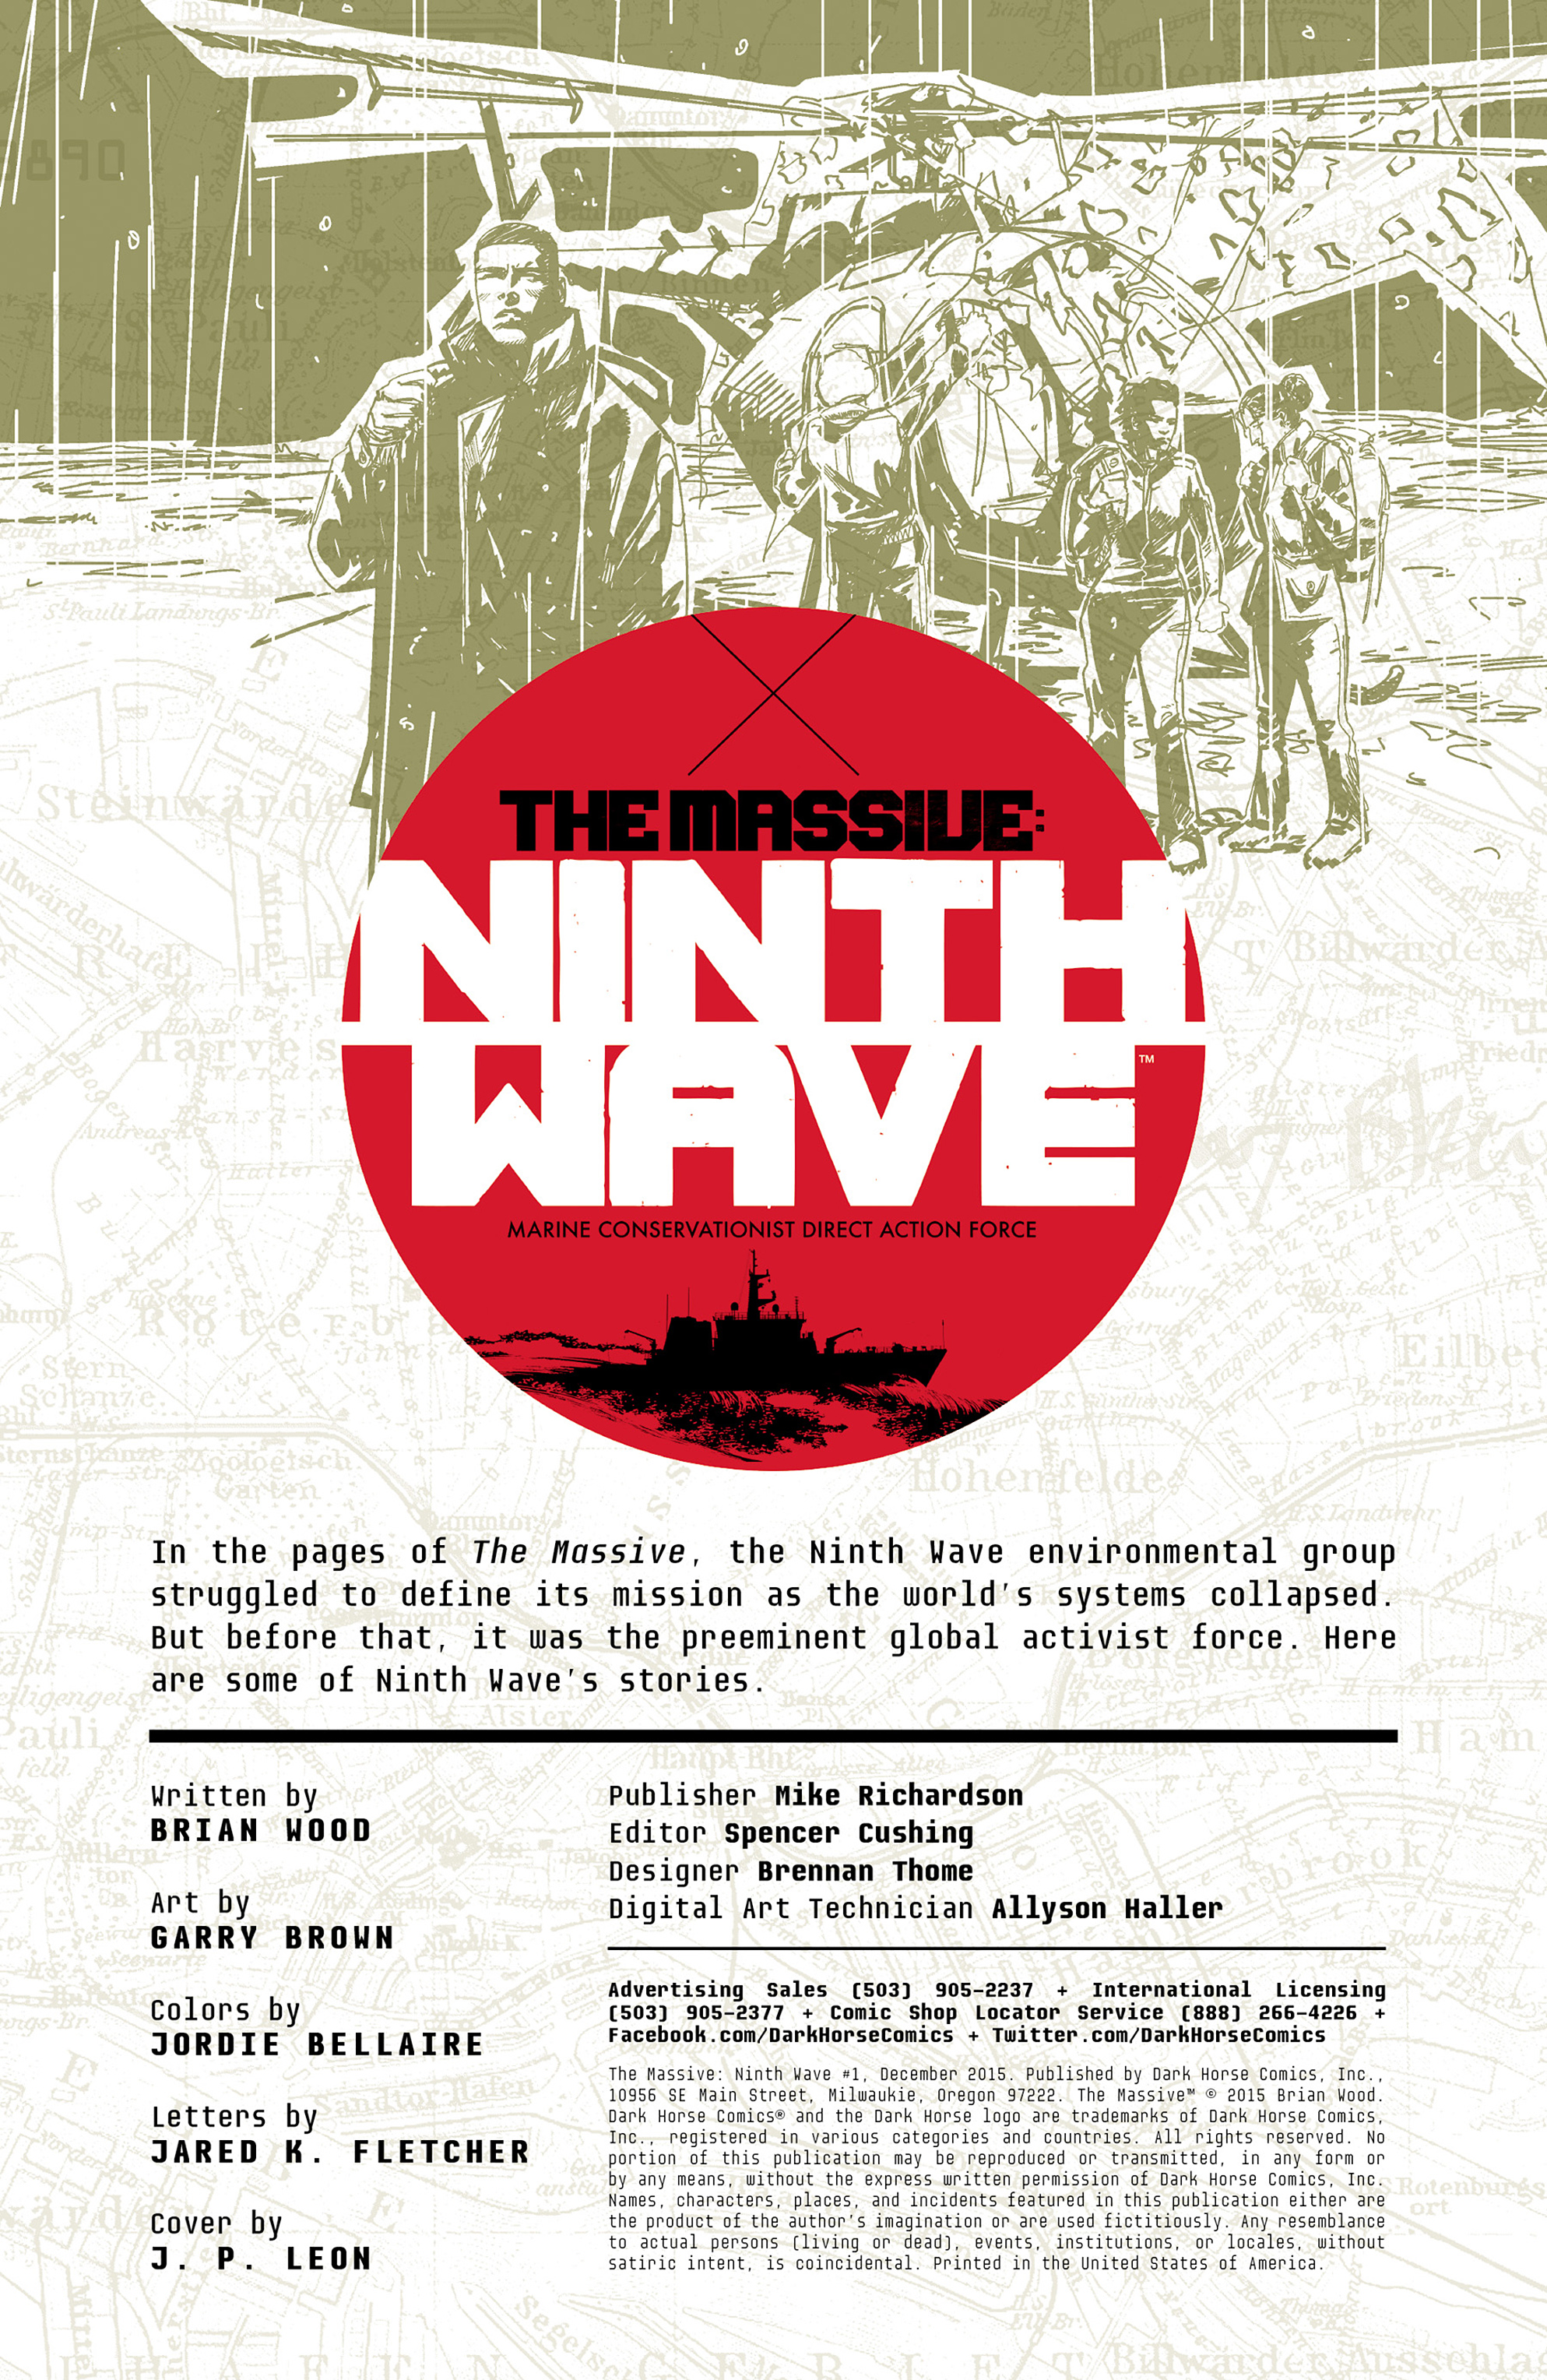 Read online The Massive: Ninth Wave comic -  Issue #1 - 2